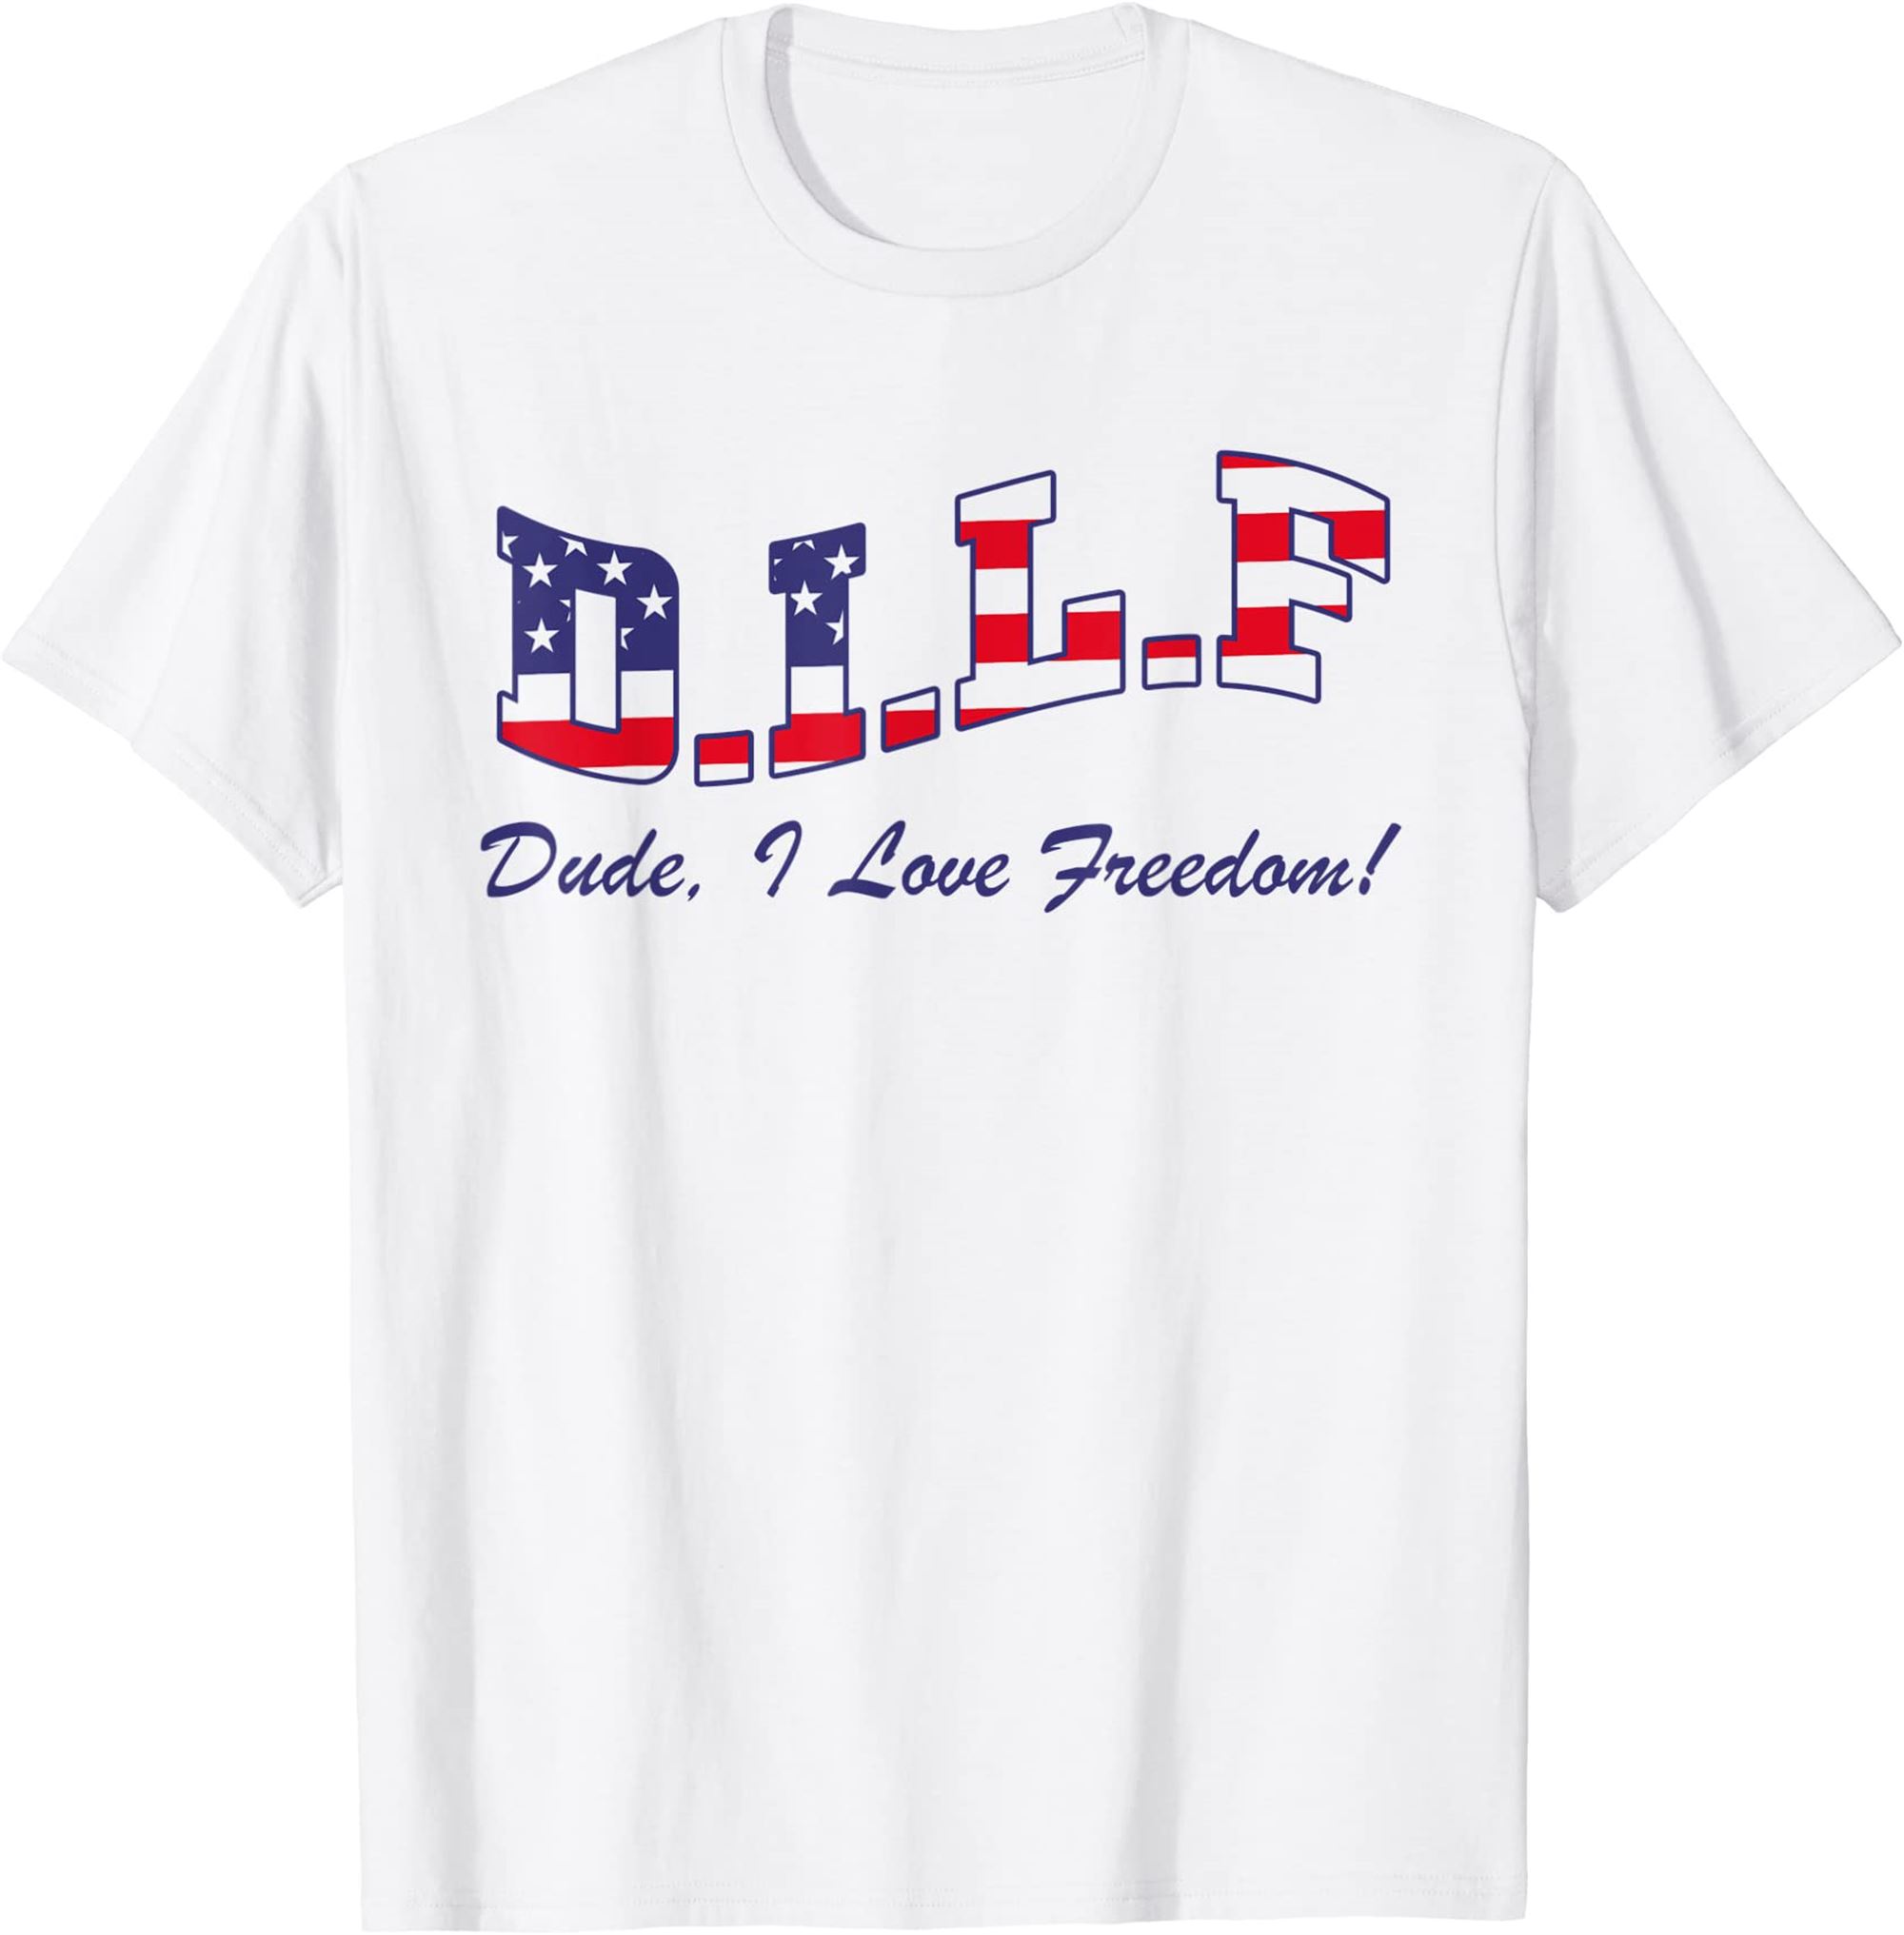 Dilf Dude I Love Freedom Funny Usa 4th July Flag Party Free T-shirt Full Size Up To 5xl